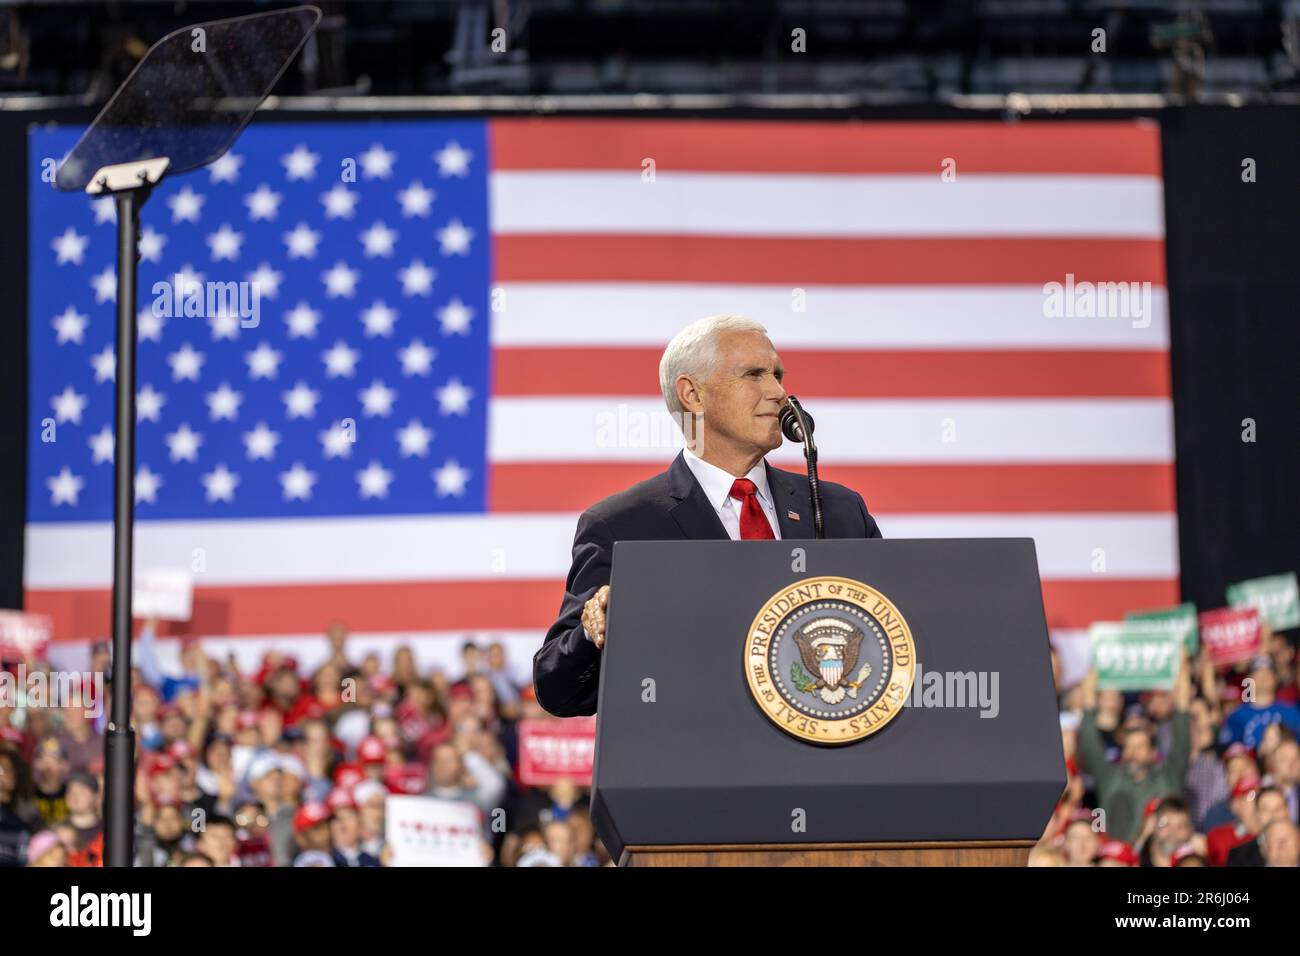 Vice President Mike Pence at a rally in Battle Creek, Michigan concurrent to the House of Representatives voting to impeach President Trump. Stock Photo